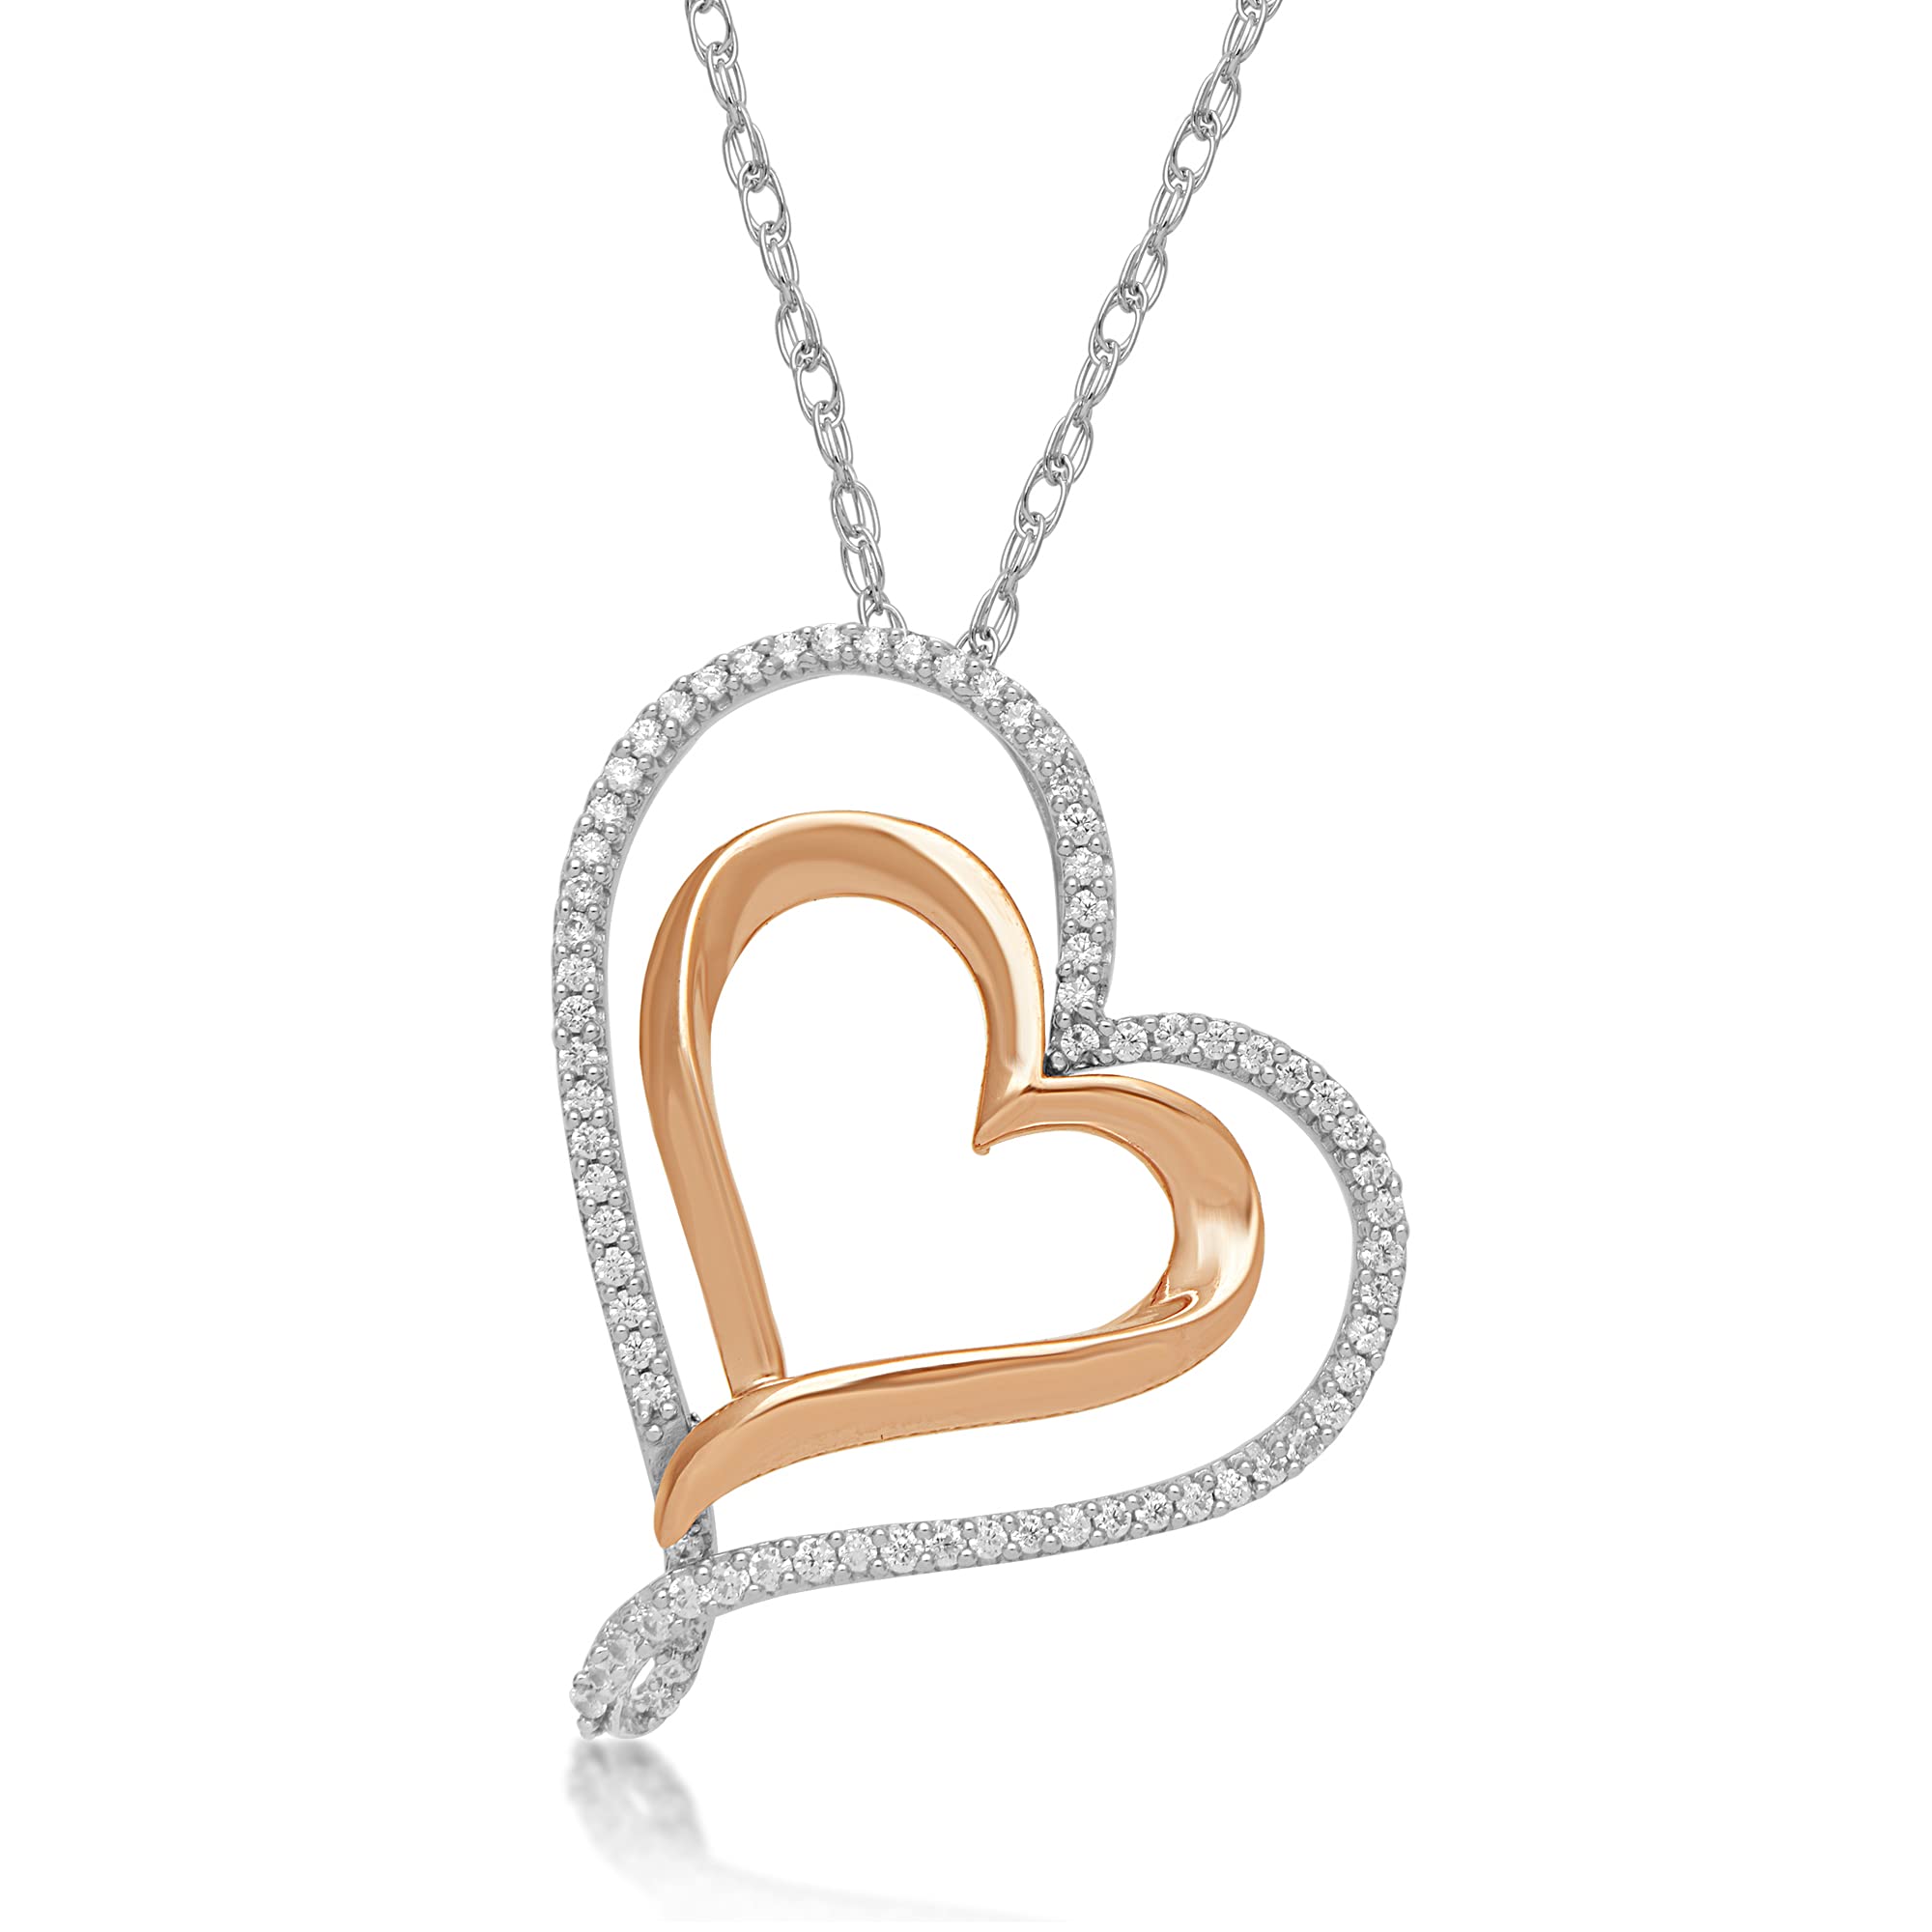 Jewelili Double Heart Pendant Necklace with Natural White Diamonds